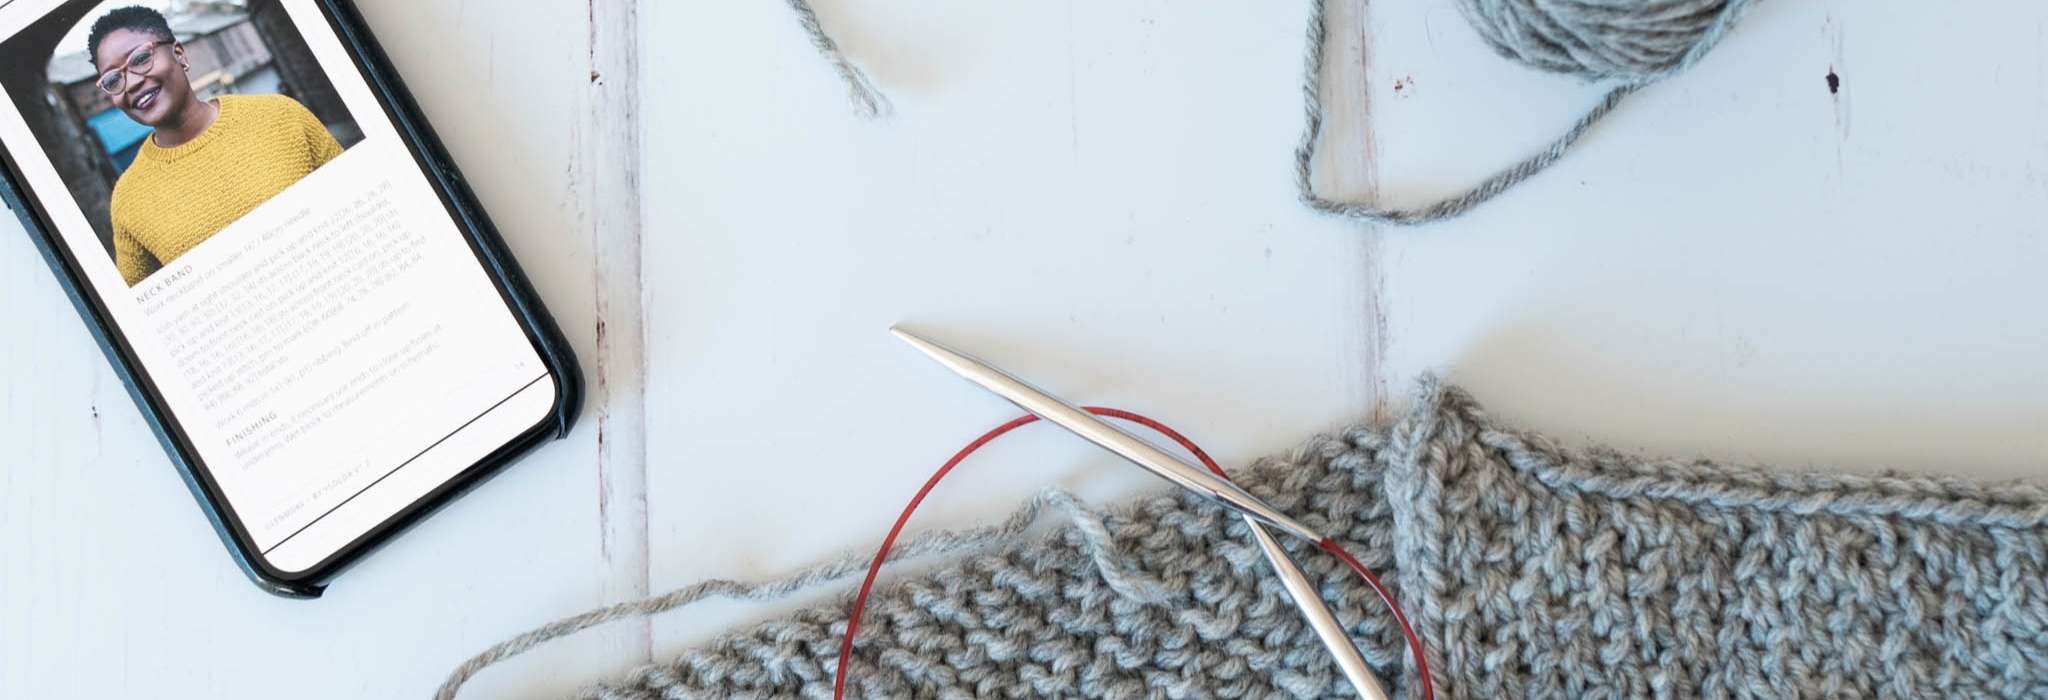 part of a grey sweater laying flat and on knitting needles next to a mobile phone showing an image of the sweater and part of a knitting pattern